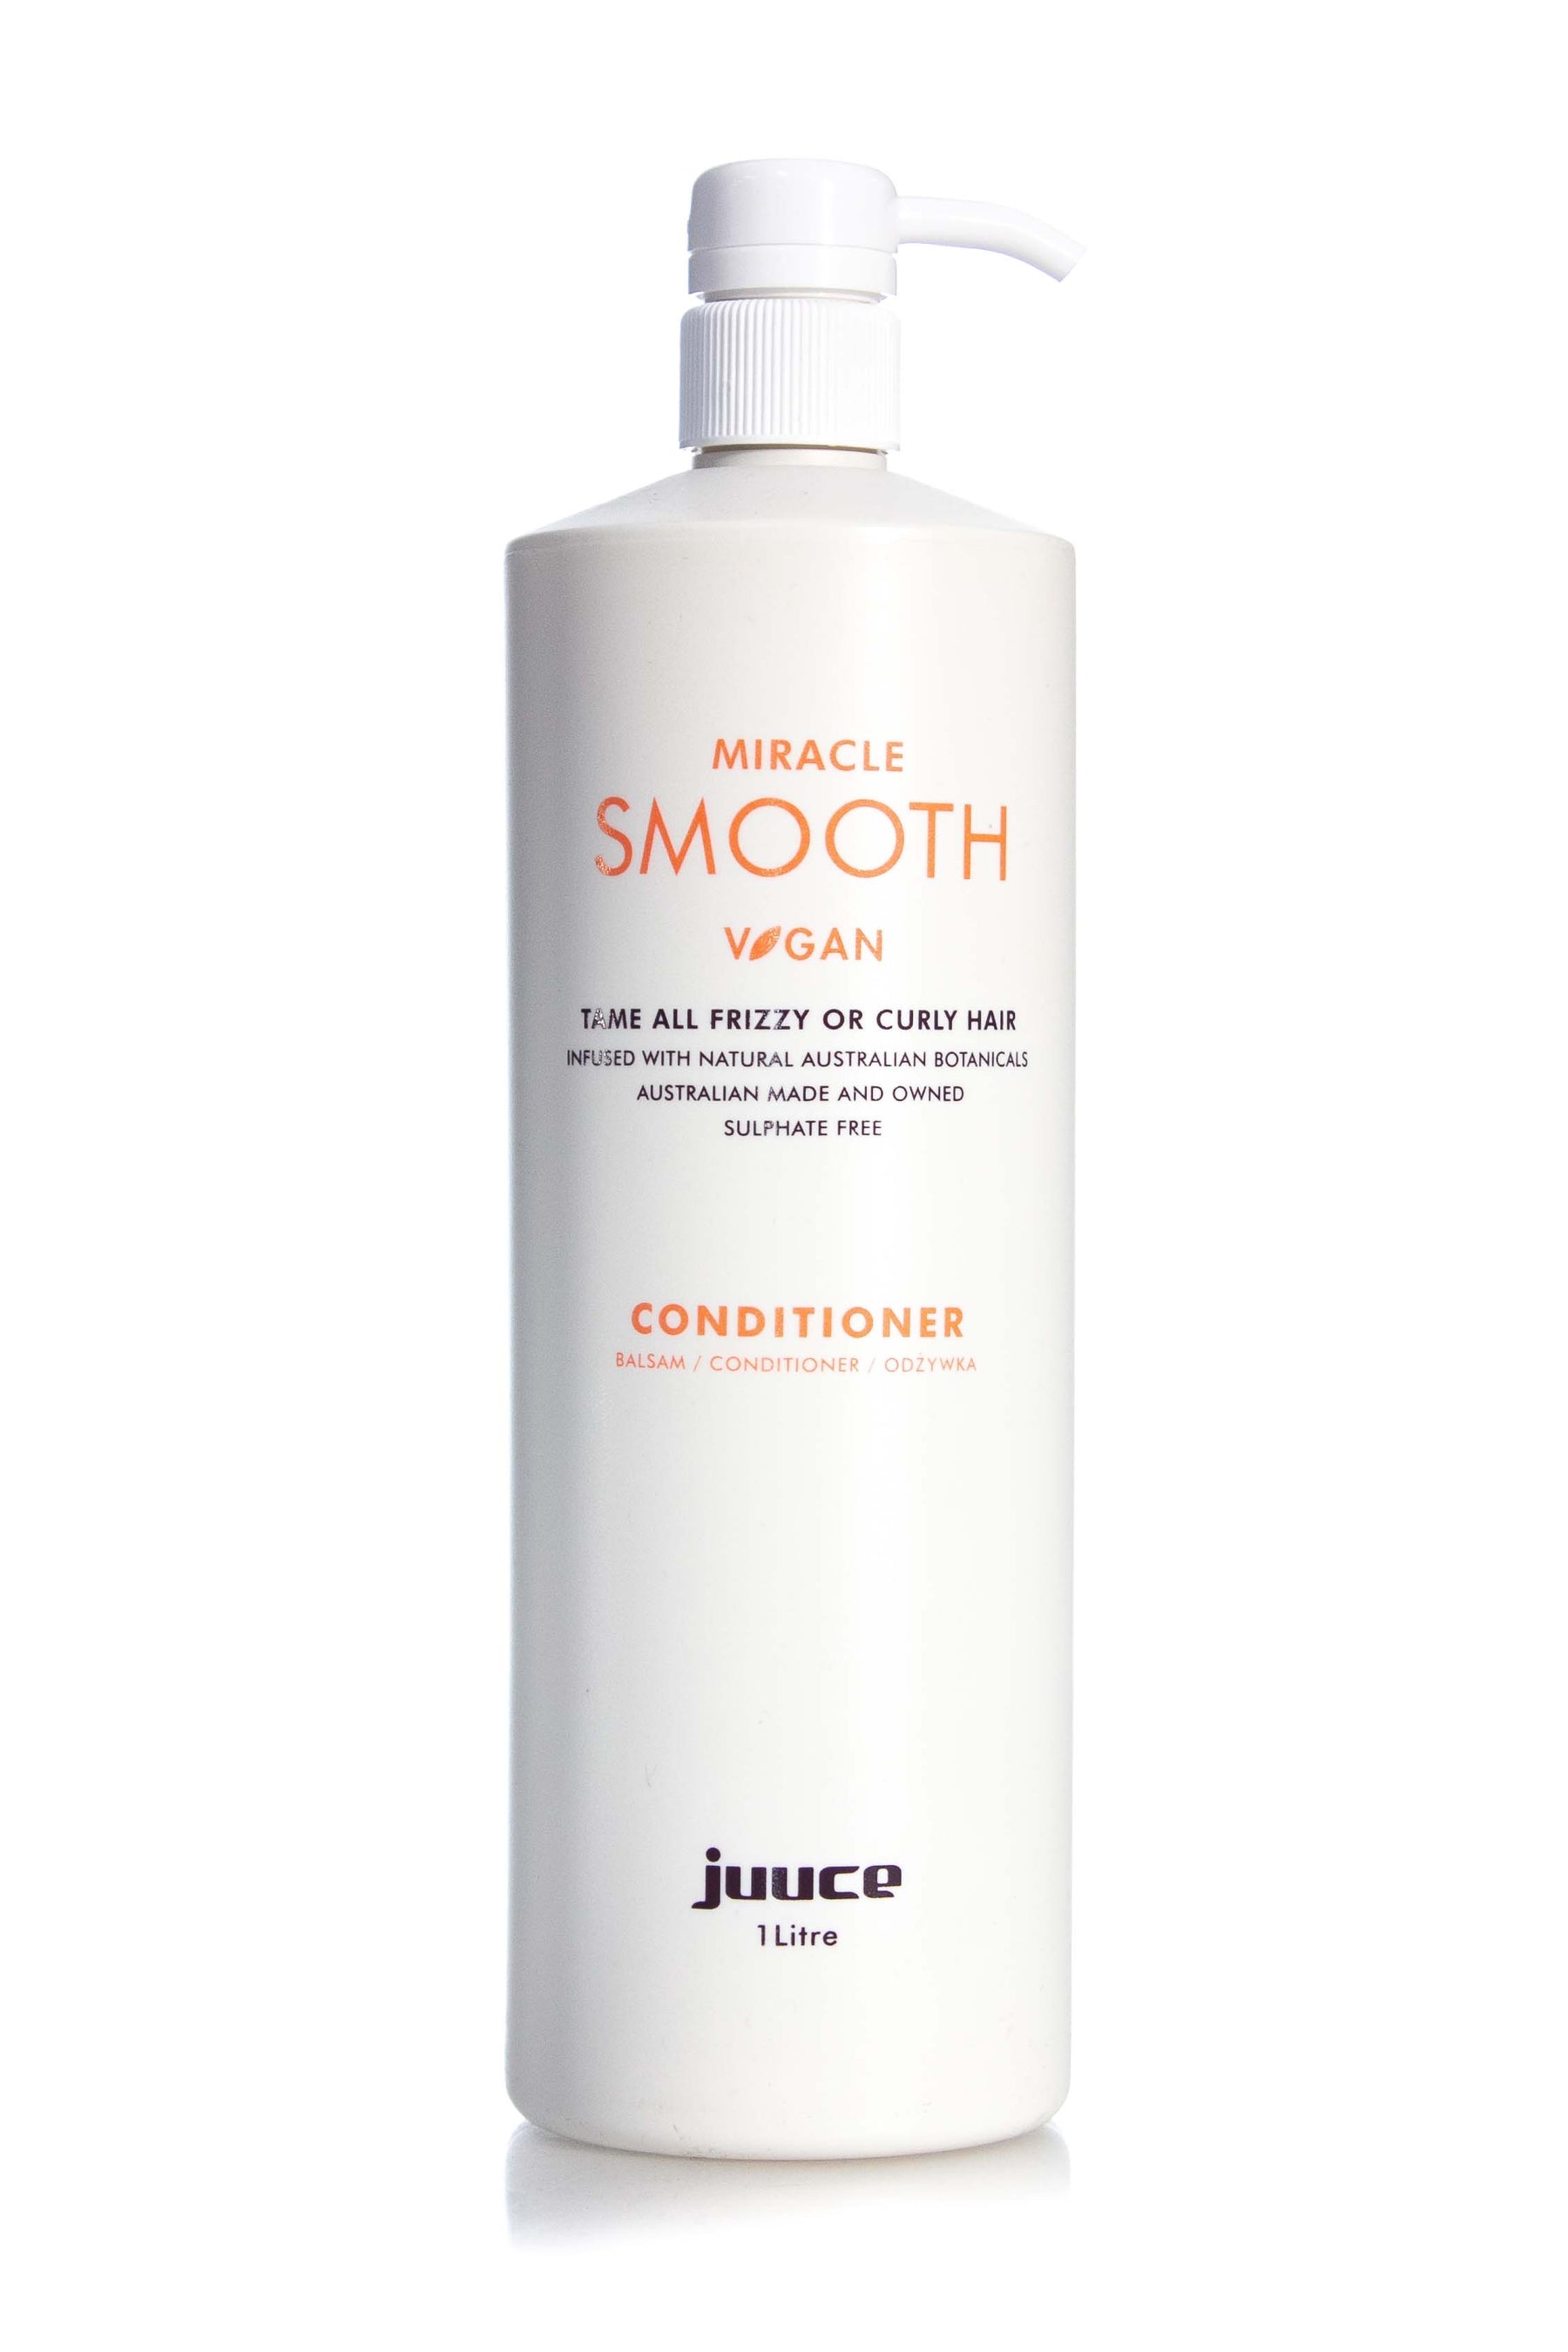 Juuce MIRACLE SMOOTH CONDITIONER 1LT (previously D'Frizz)